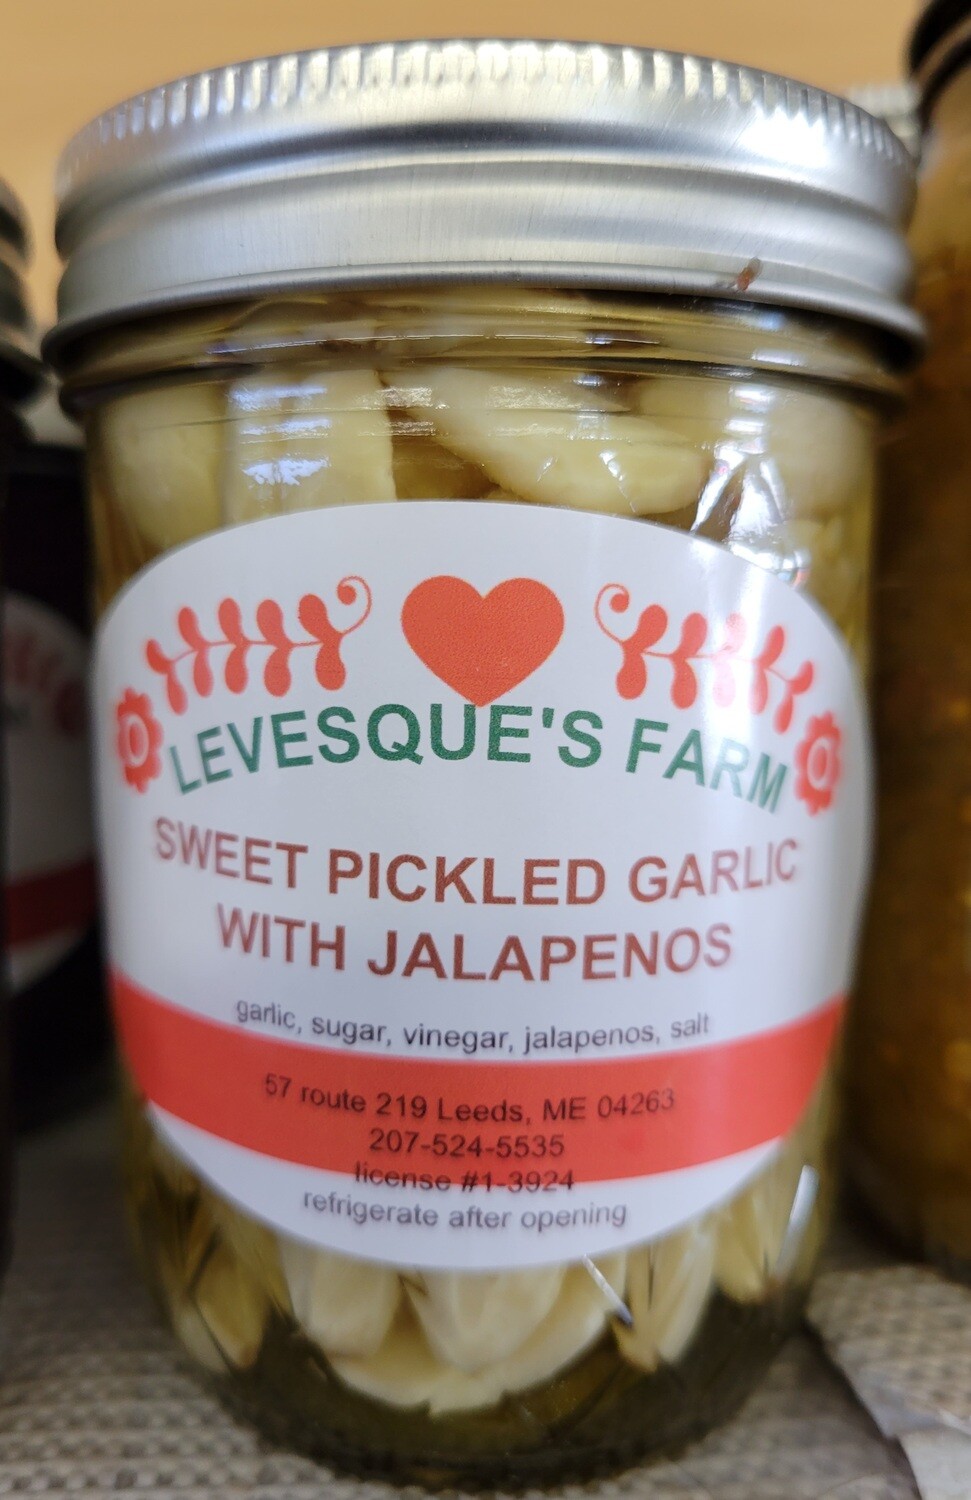 Levesque's Farm - Sweet Pickled Garlic with Jalapeños